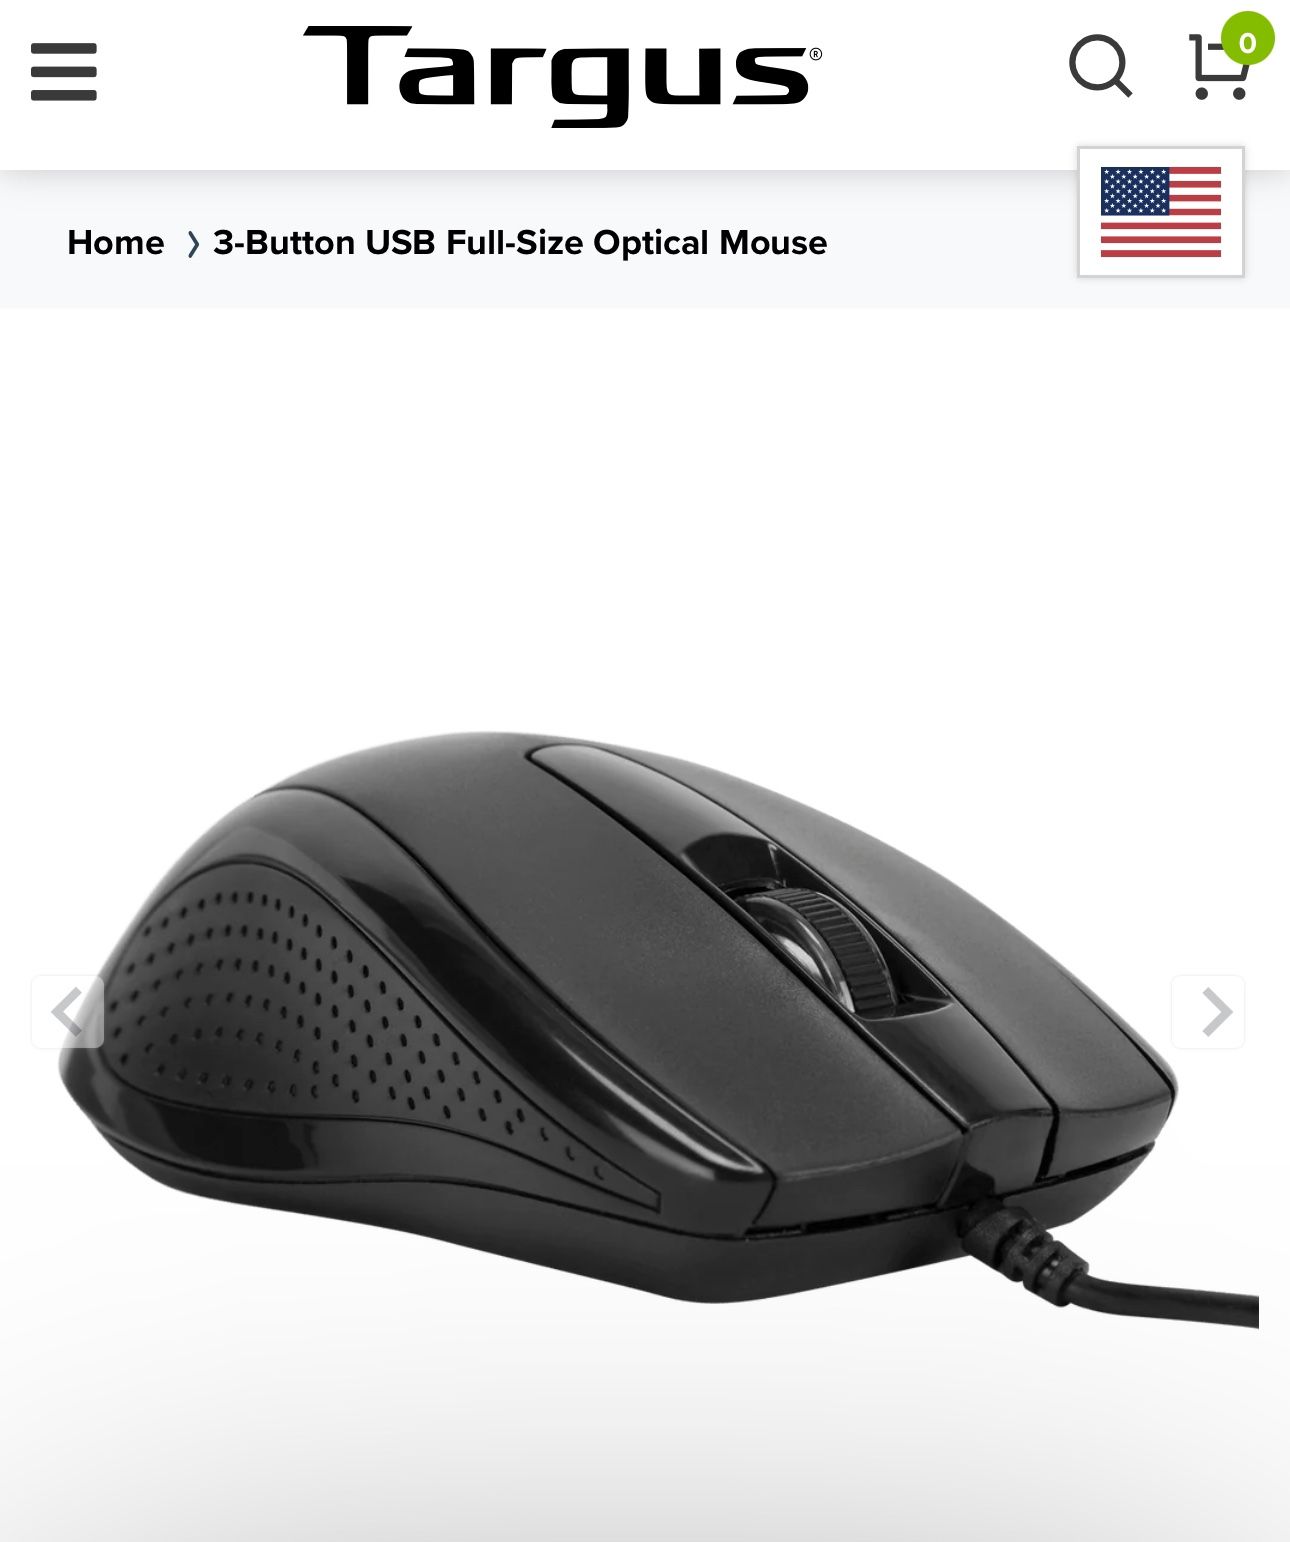 Targus Mouse. 3-Button USB Full-Size Optical Mouse